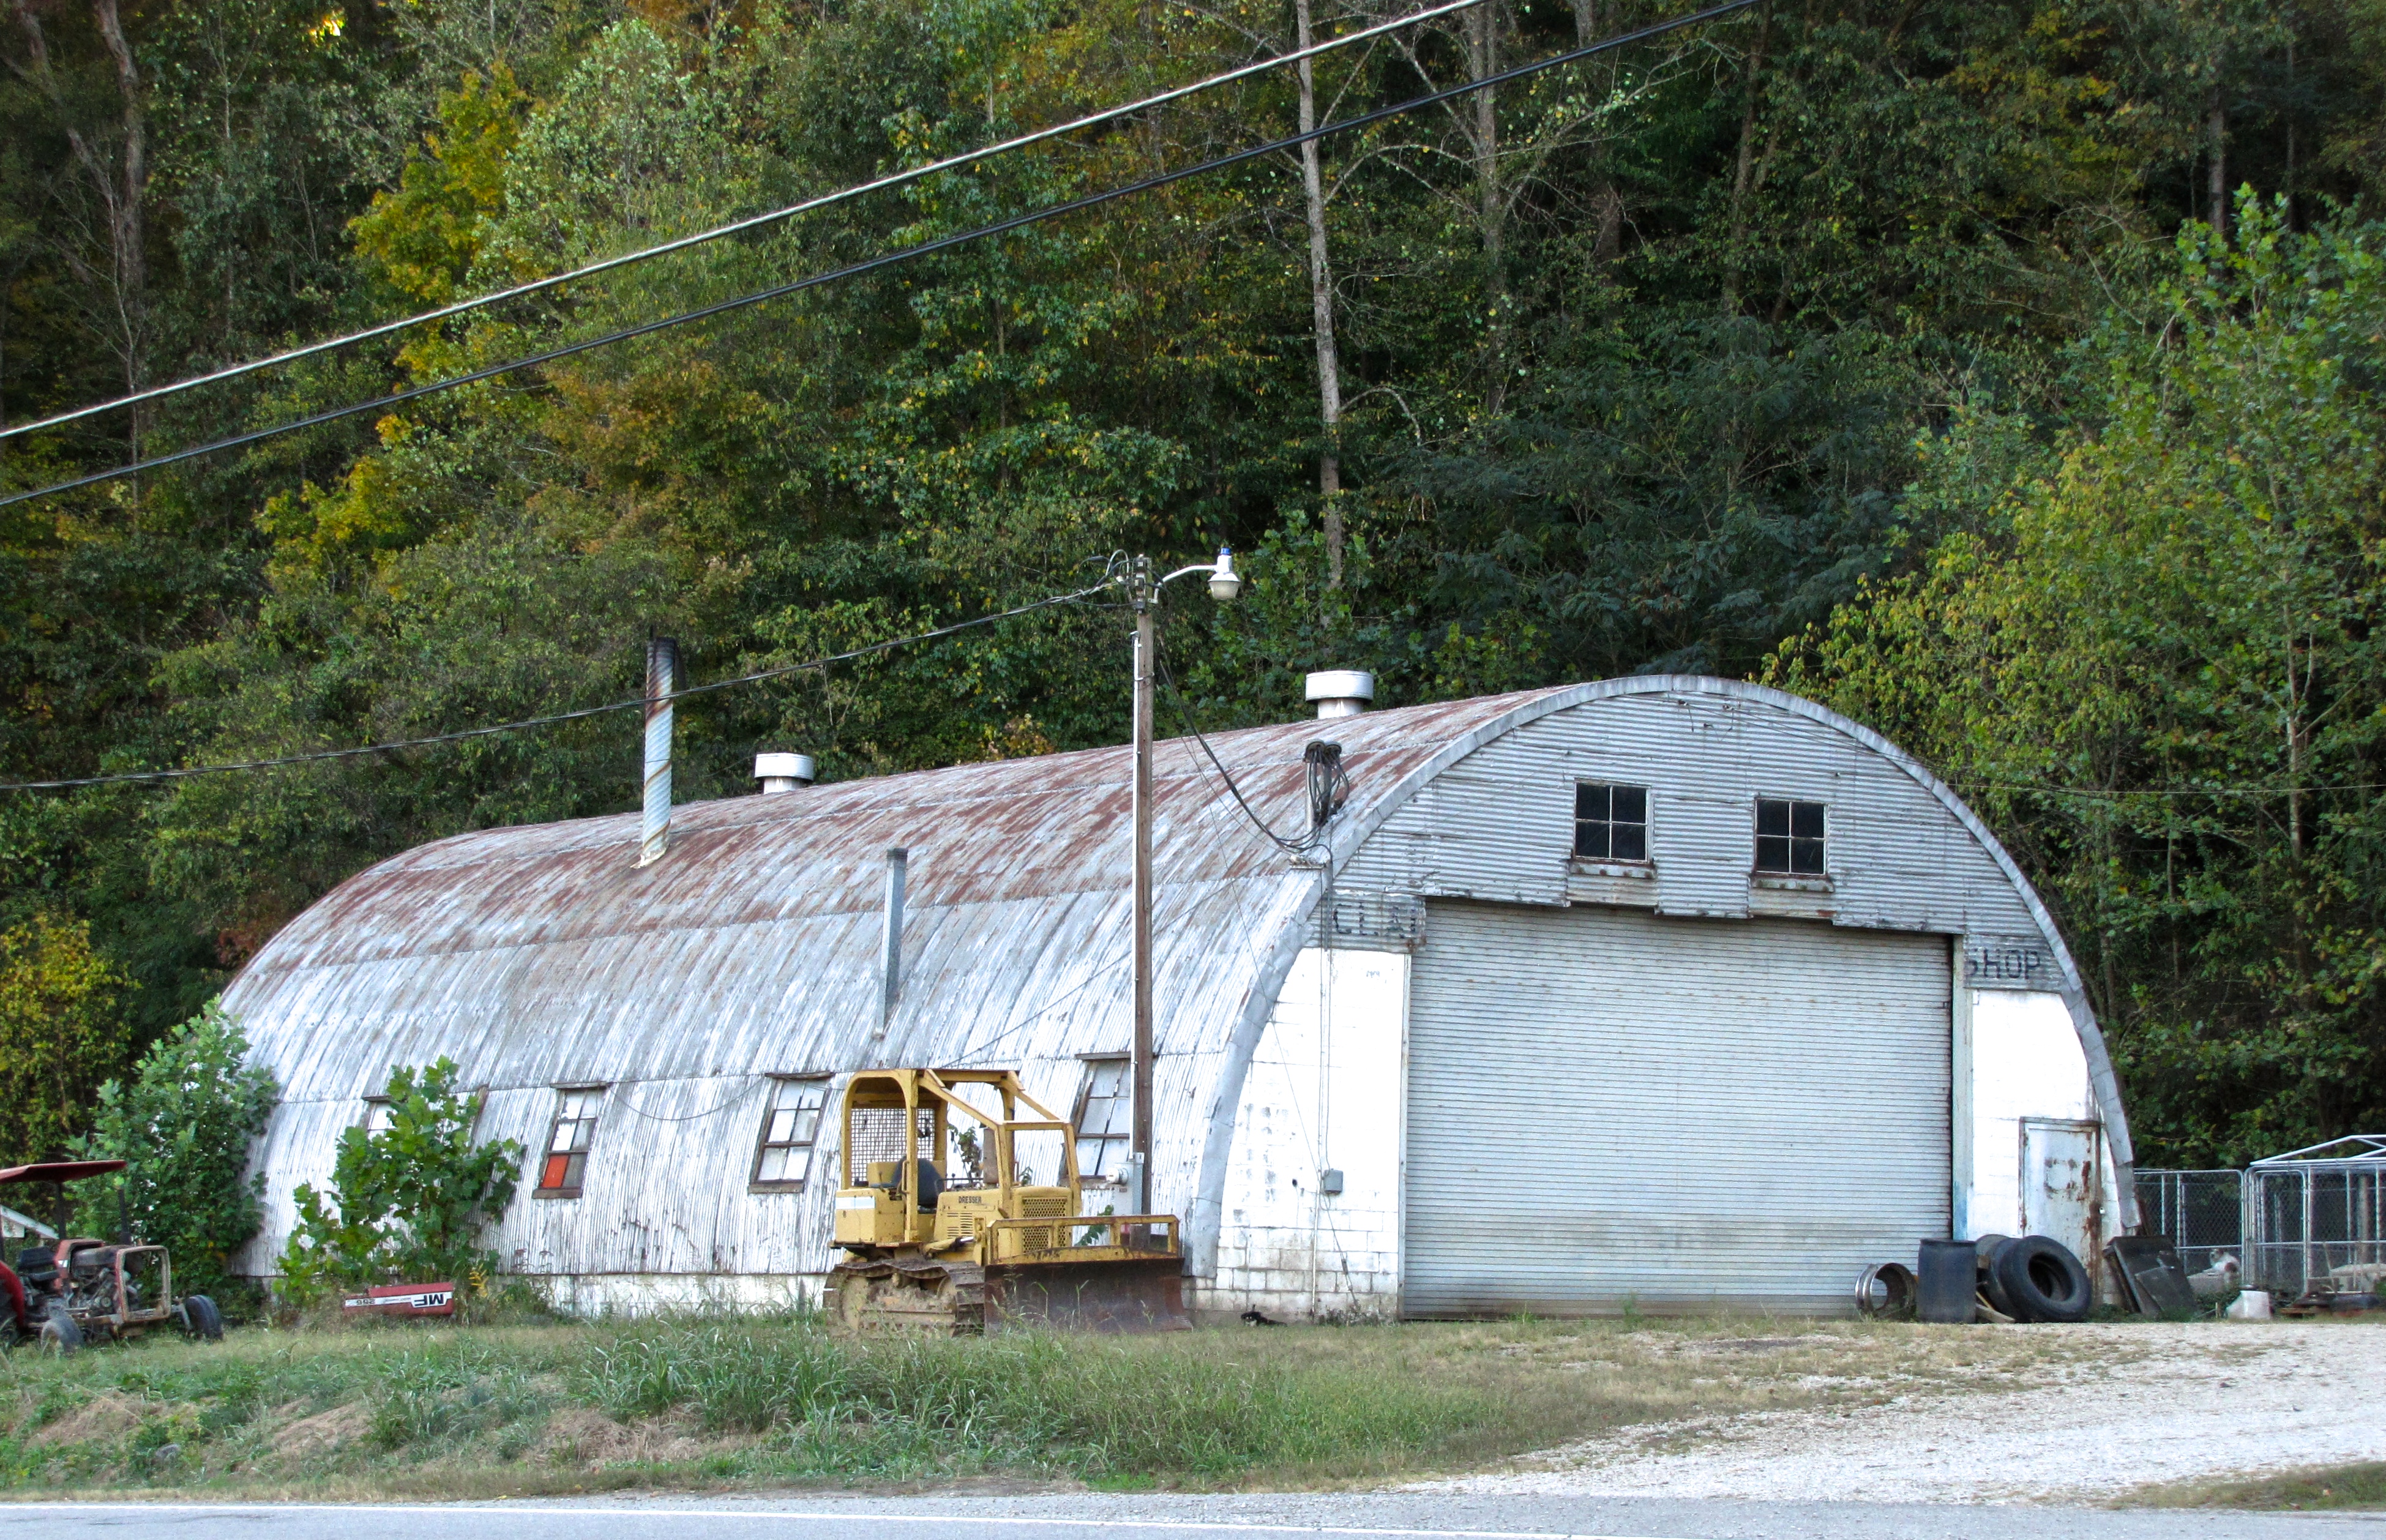 quonset hut in Terms Of Service, CO